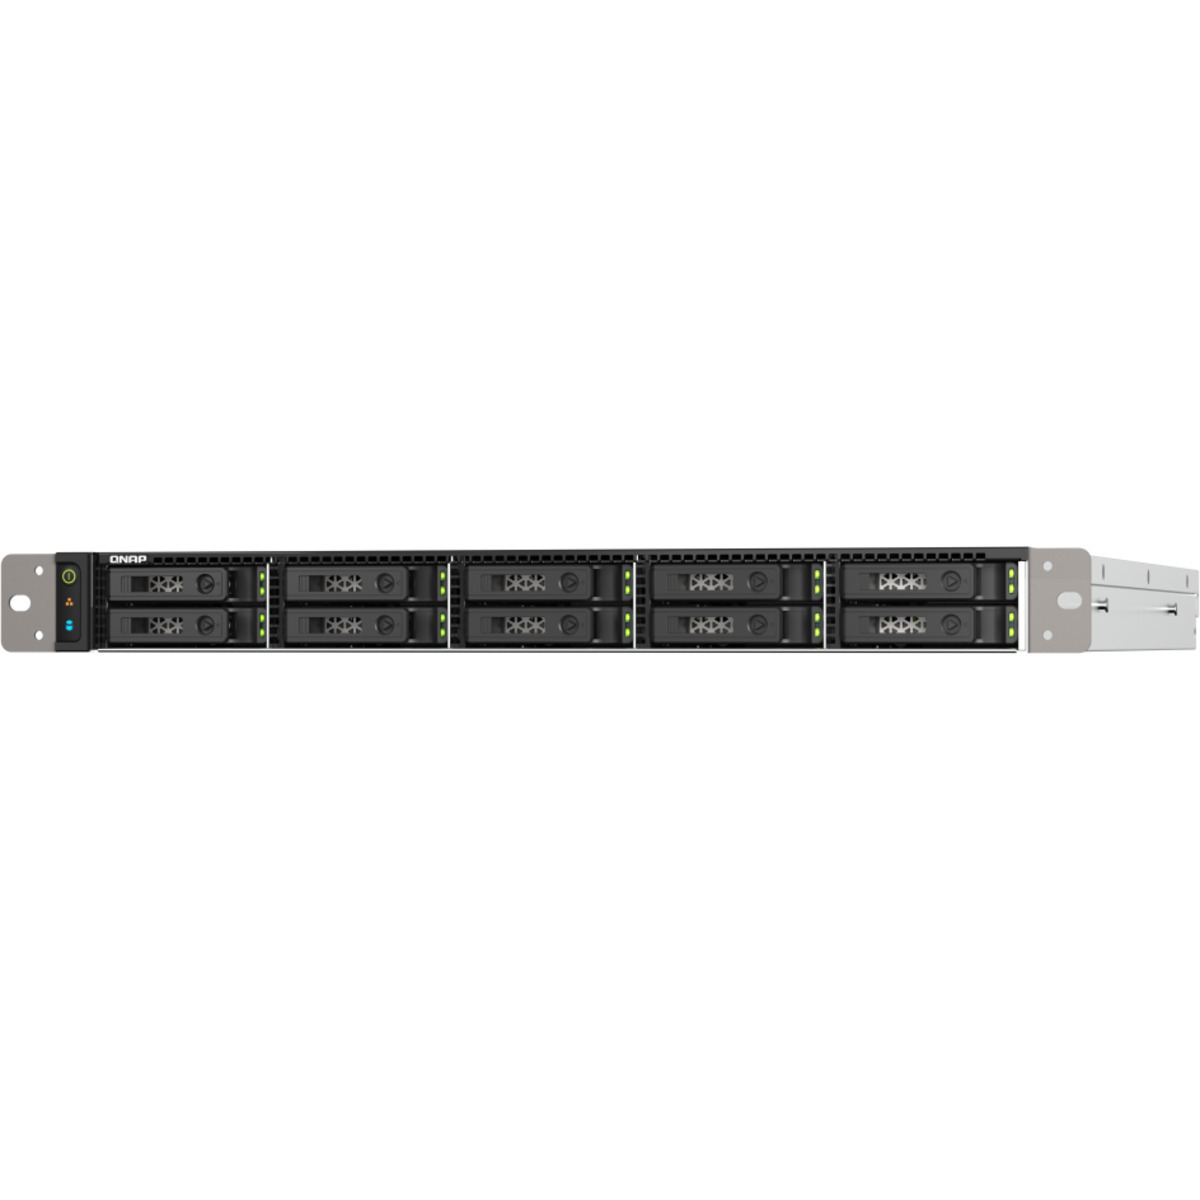 QNAP TS-h1090FU-7302P 64tb 10-Bay RackMount Large Business / Enterprise NAS - Network Attached Storage Device 8x8tb Sabrent Rocket 4 Plus SB-RKT4P-8TB  7100/6000MB/s M.2 2280 NVMe SSD CONSUMER Class Drives Installed - Burn-In Tested TS-h1090FU-7302P